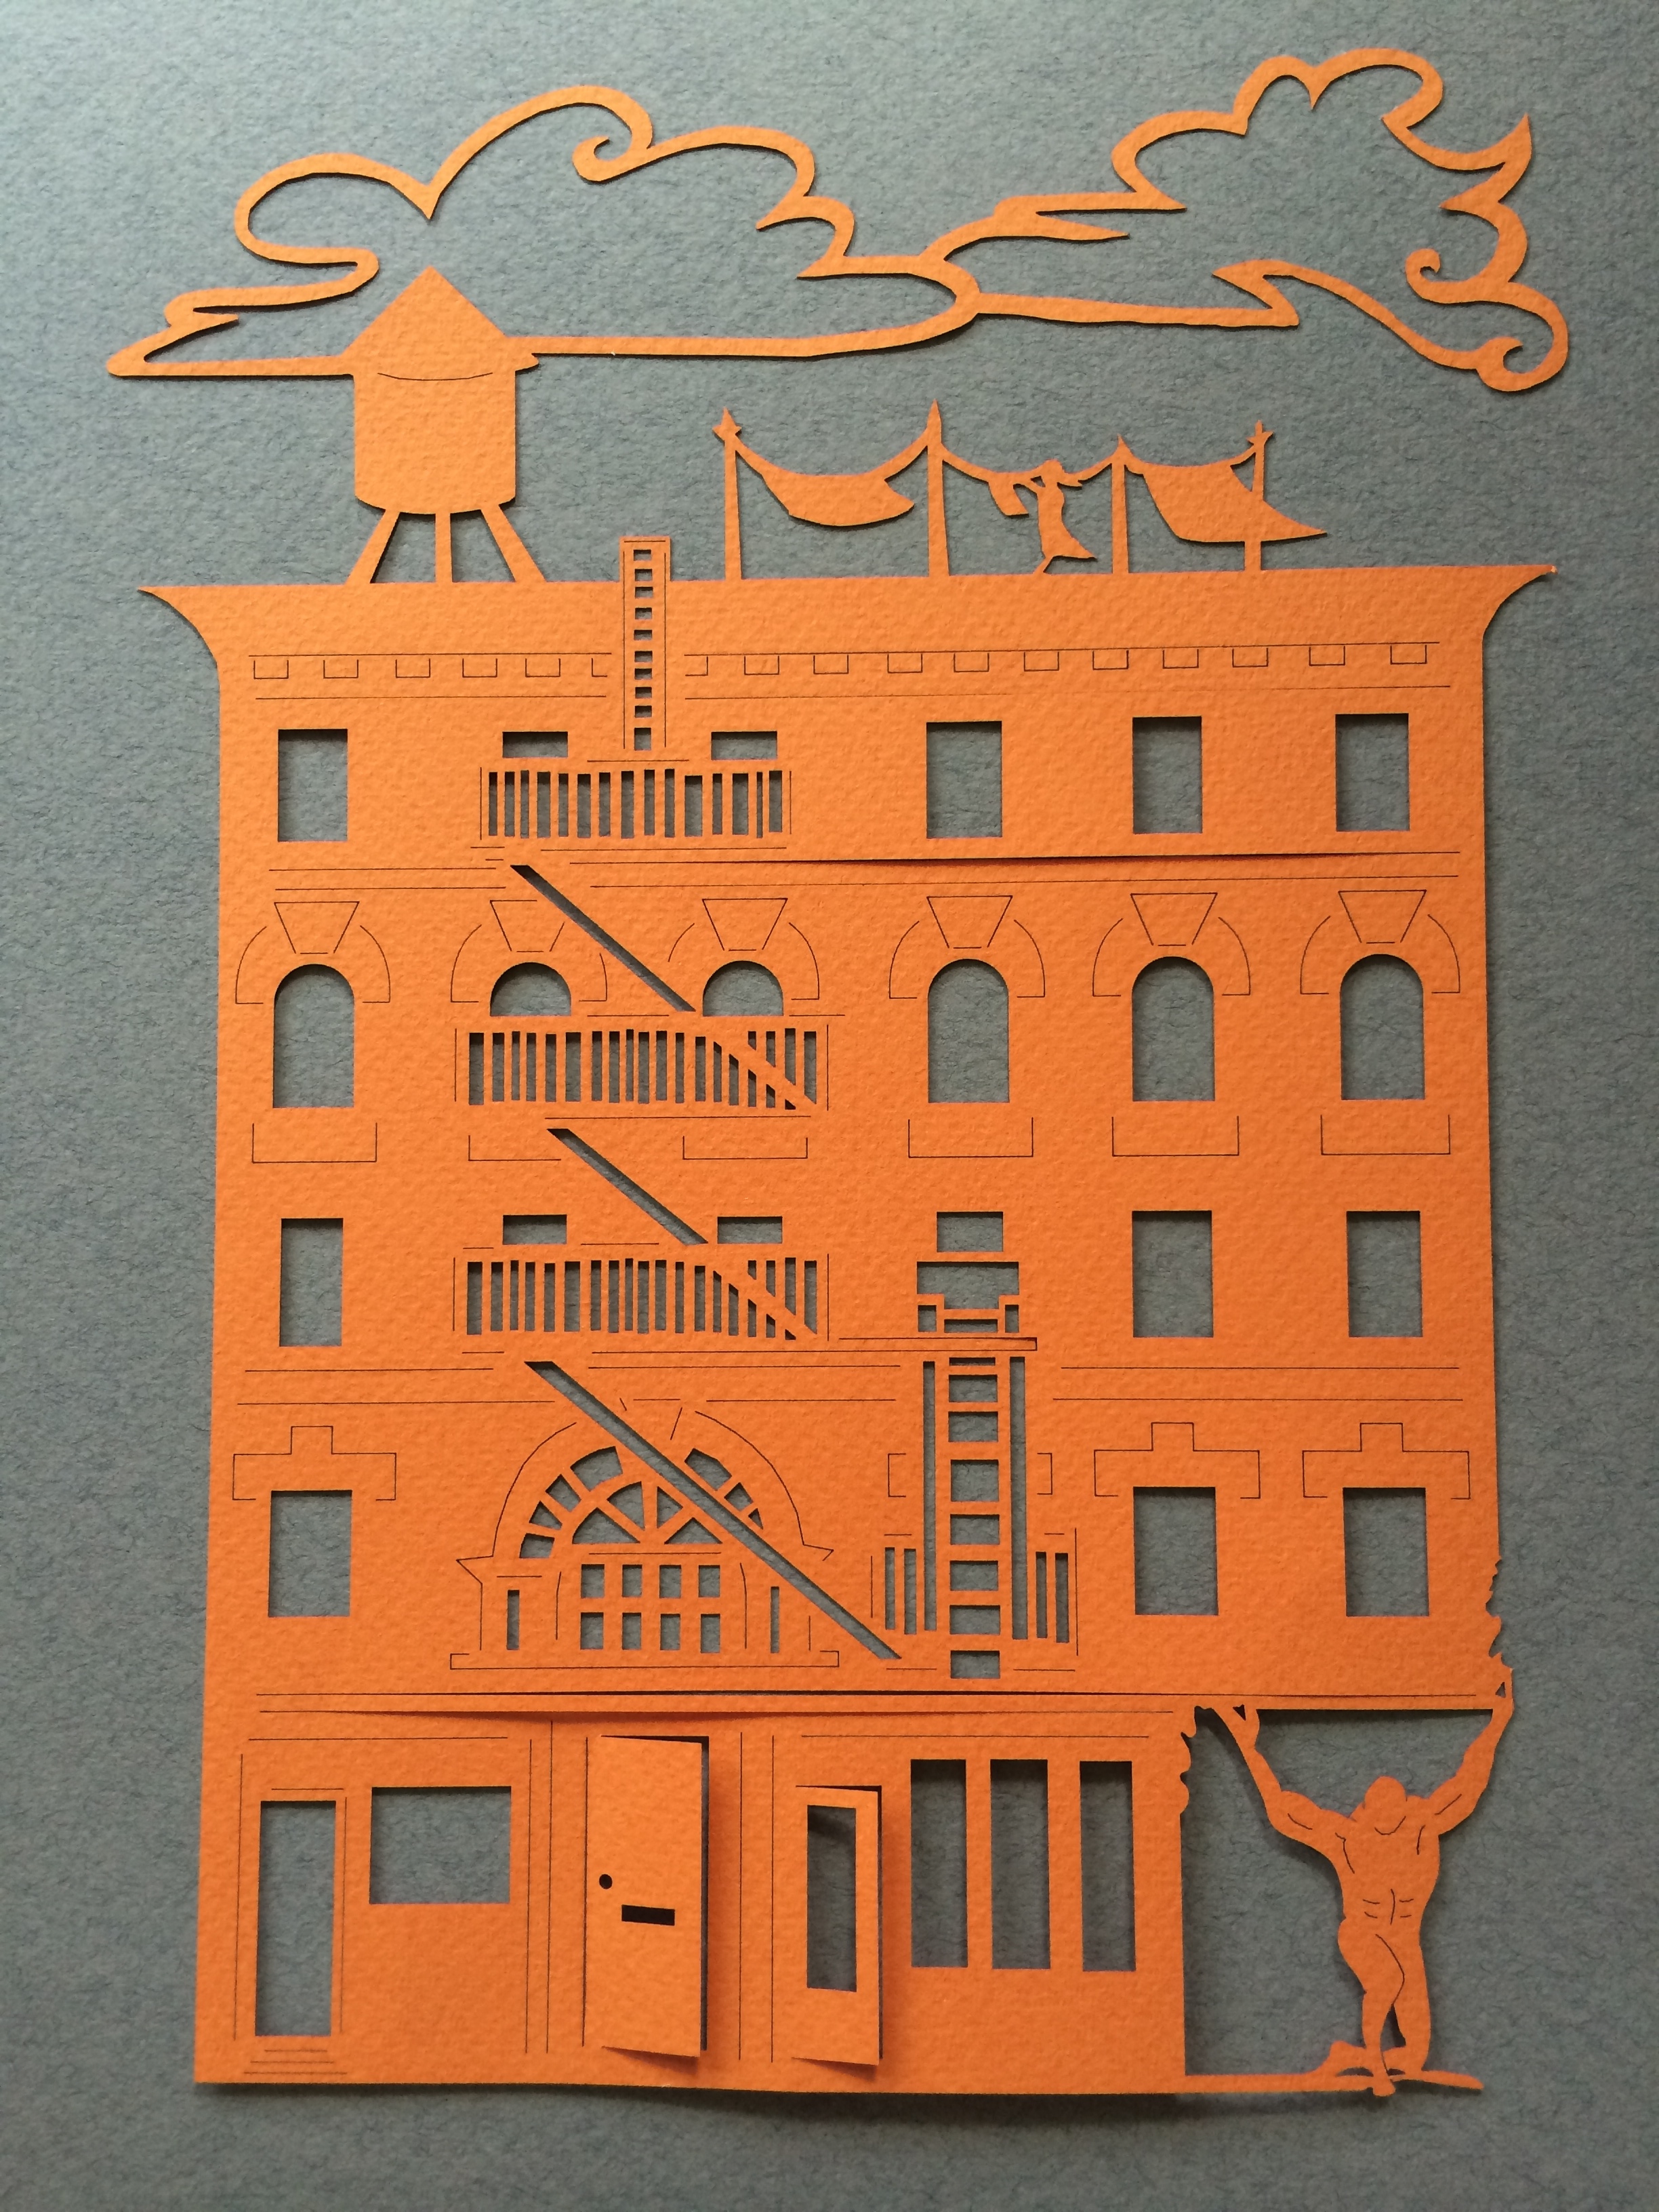 WINDOW PAIN...Atlas strains to hold up building in this laser-cut